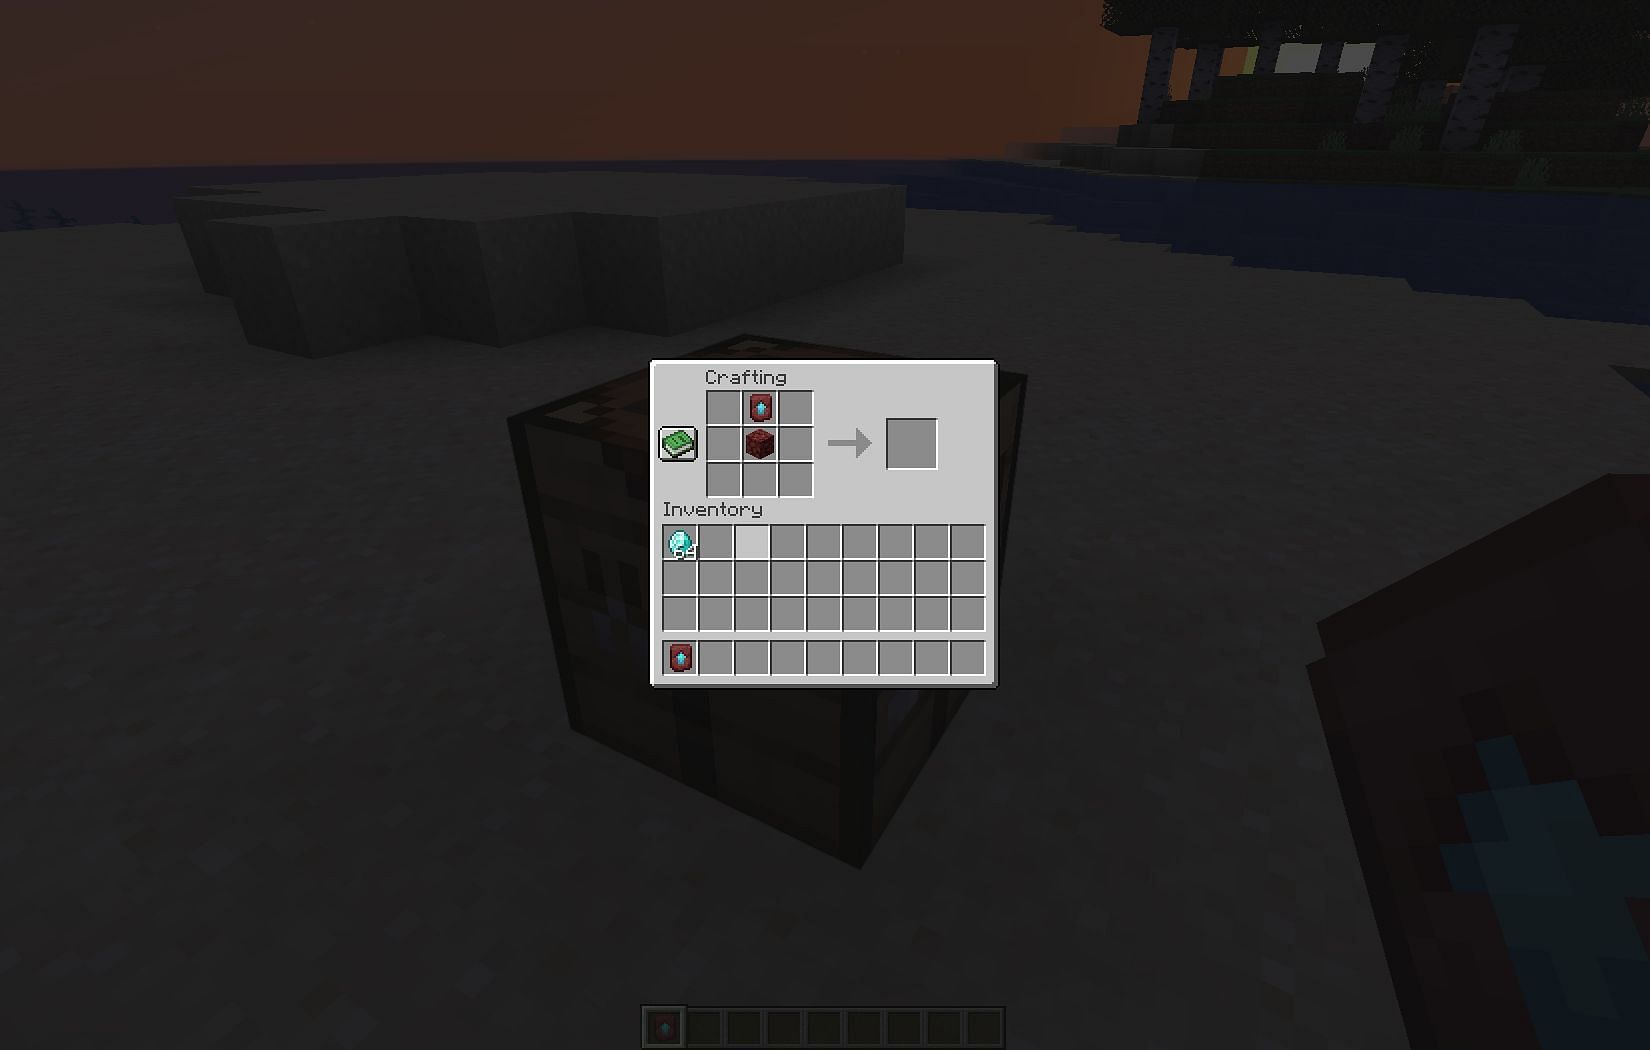 Every template has a different corresponding block (Image via Mojang)